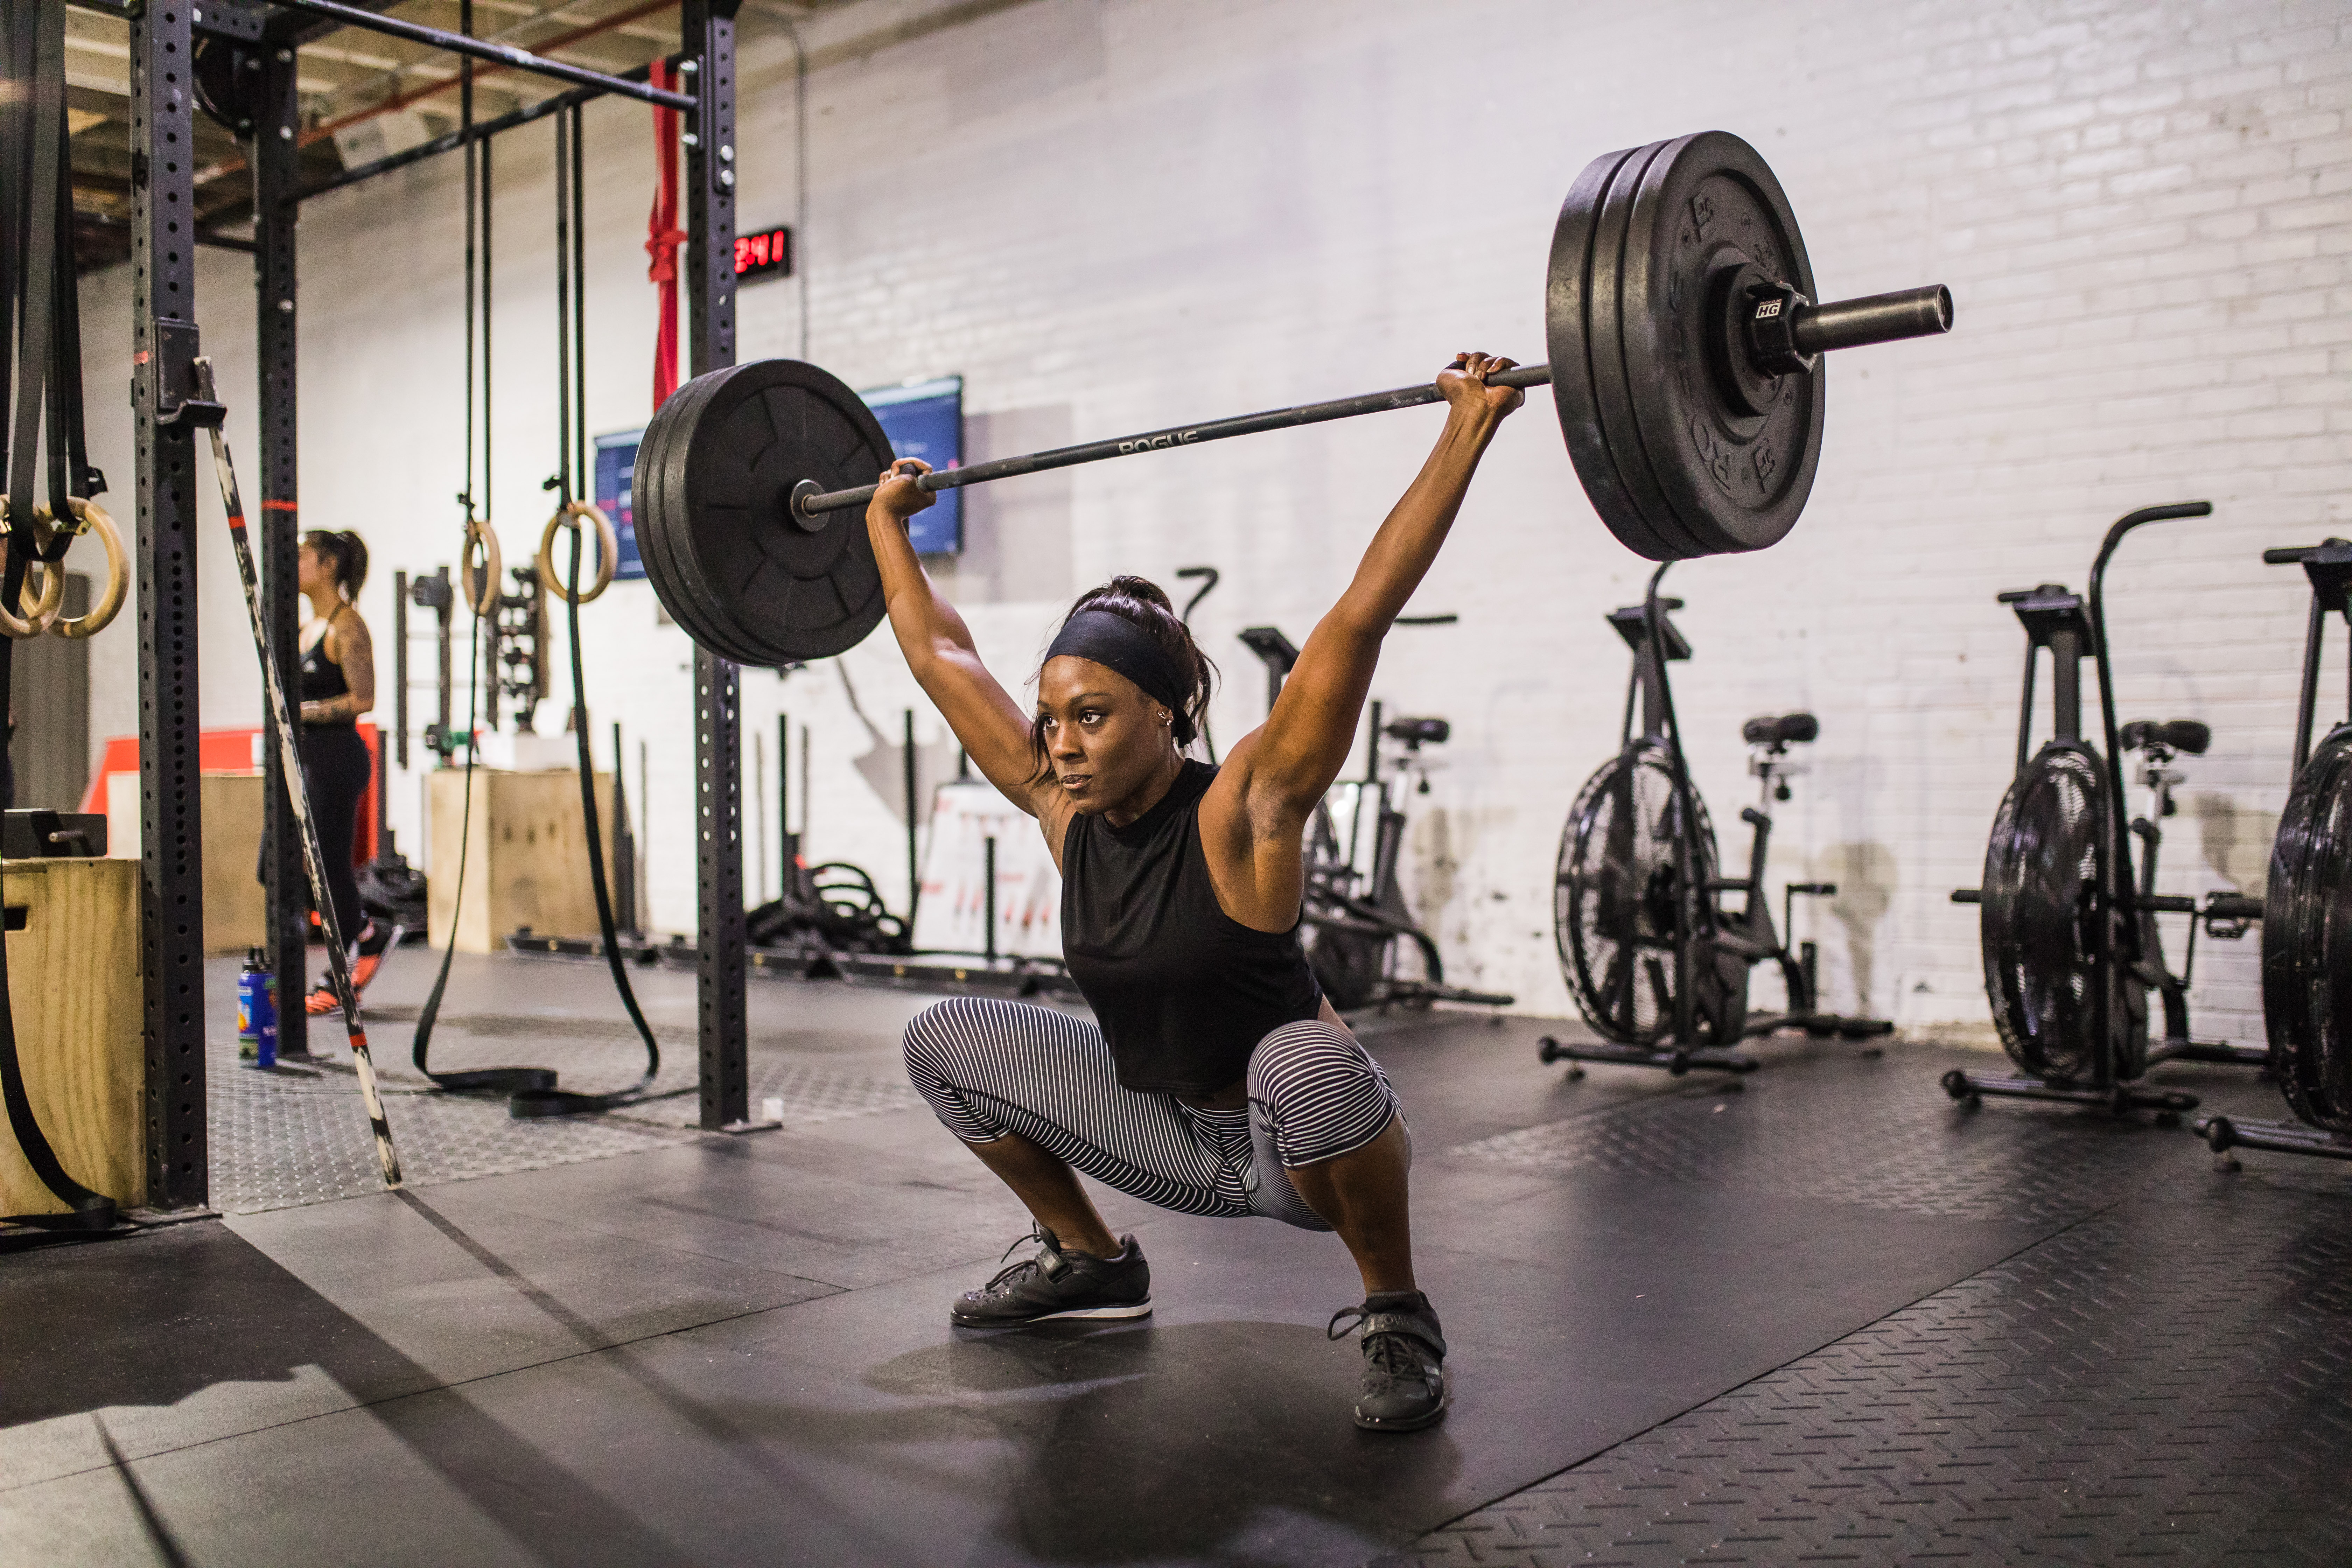 Tuesday, April 16 2019 – Crossfit UNLEASHED